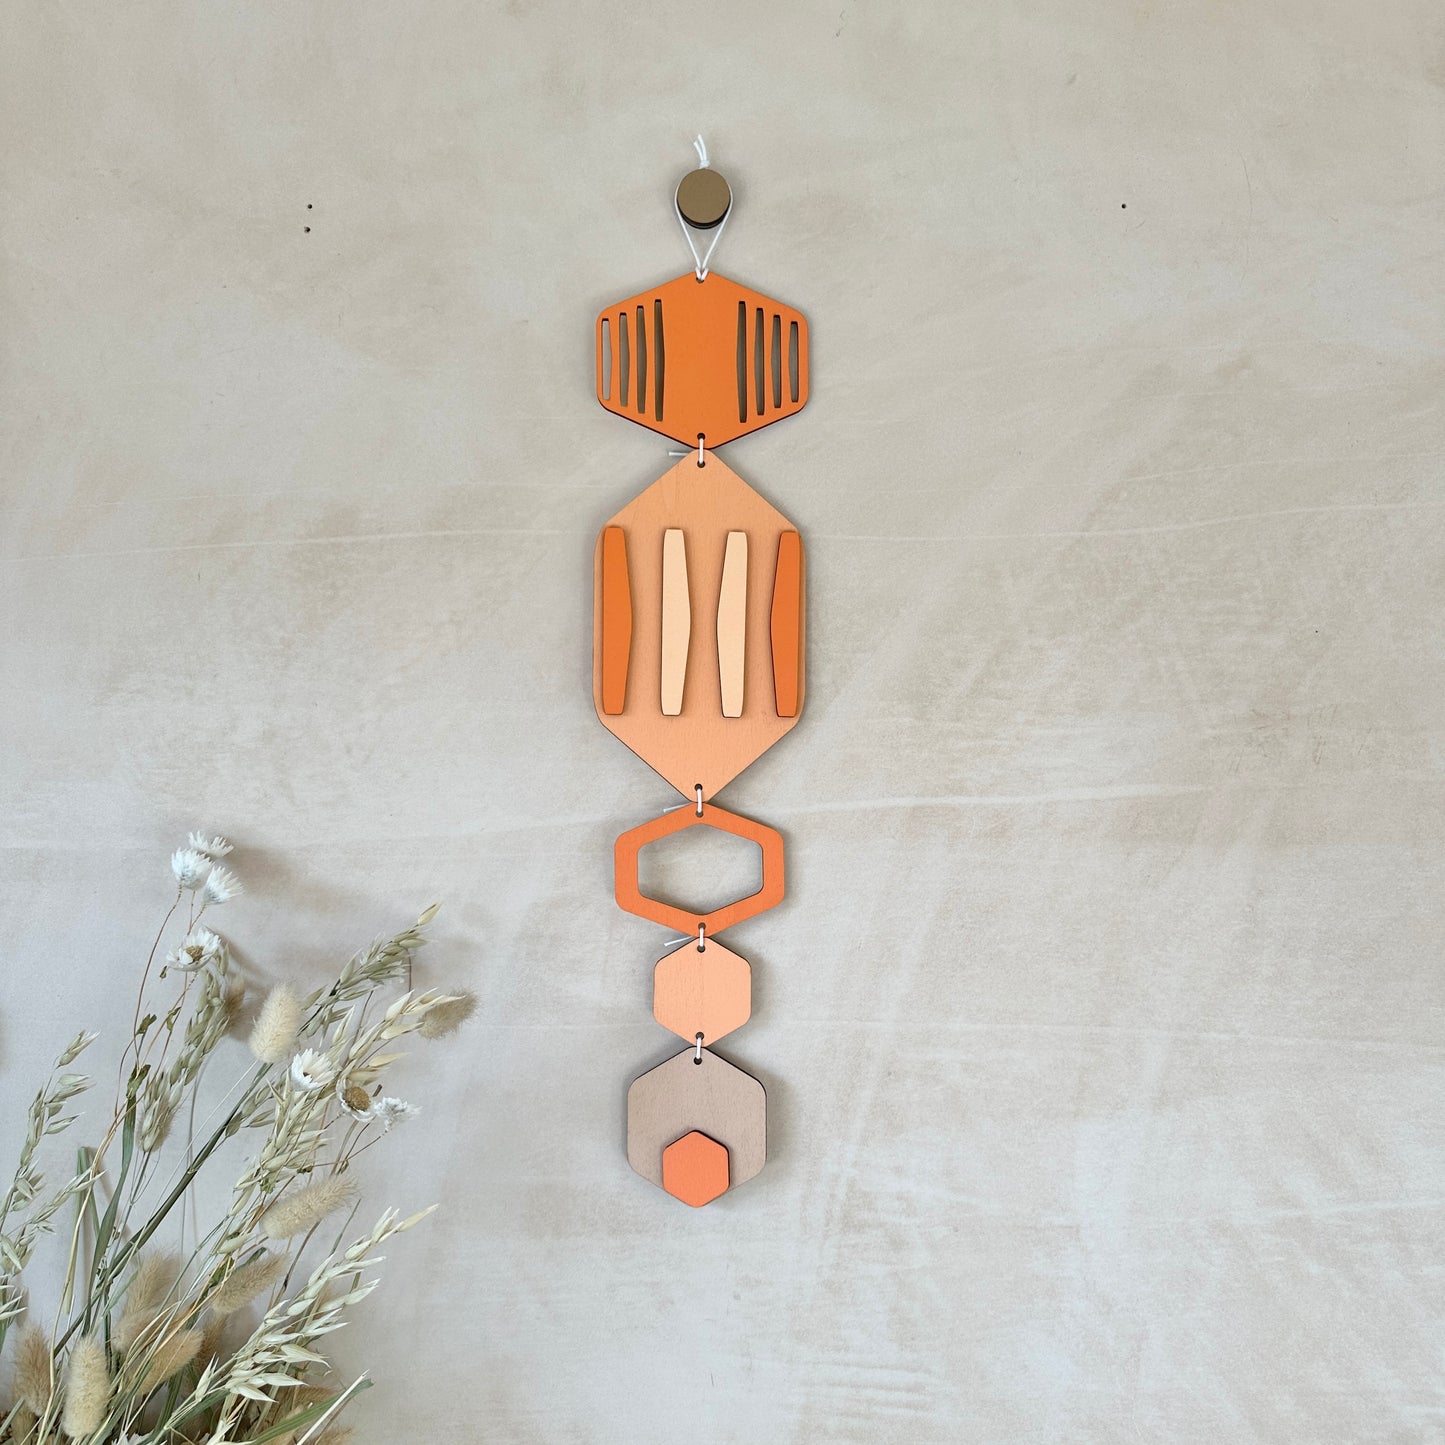 Hexagon Wall Hanging - Orange Bright Wall Art - Hand Painted Art - Home Gift For Them - New Home Decor Gift - Coral Decor - New Home Gift